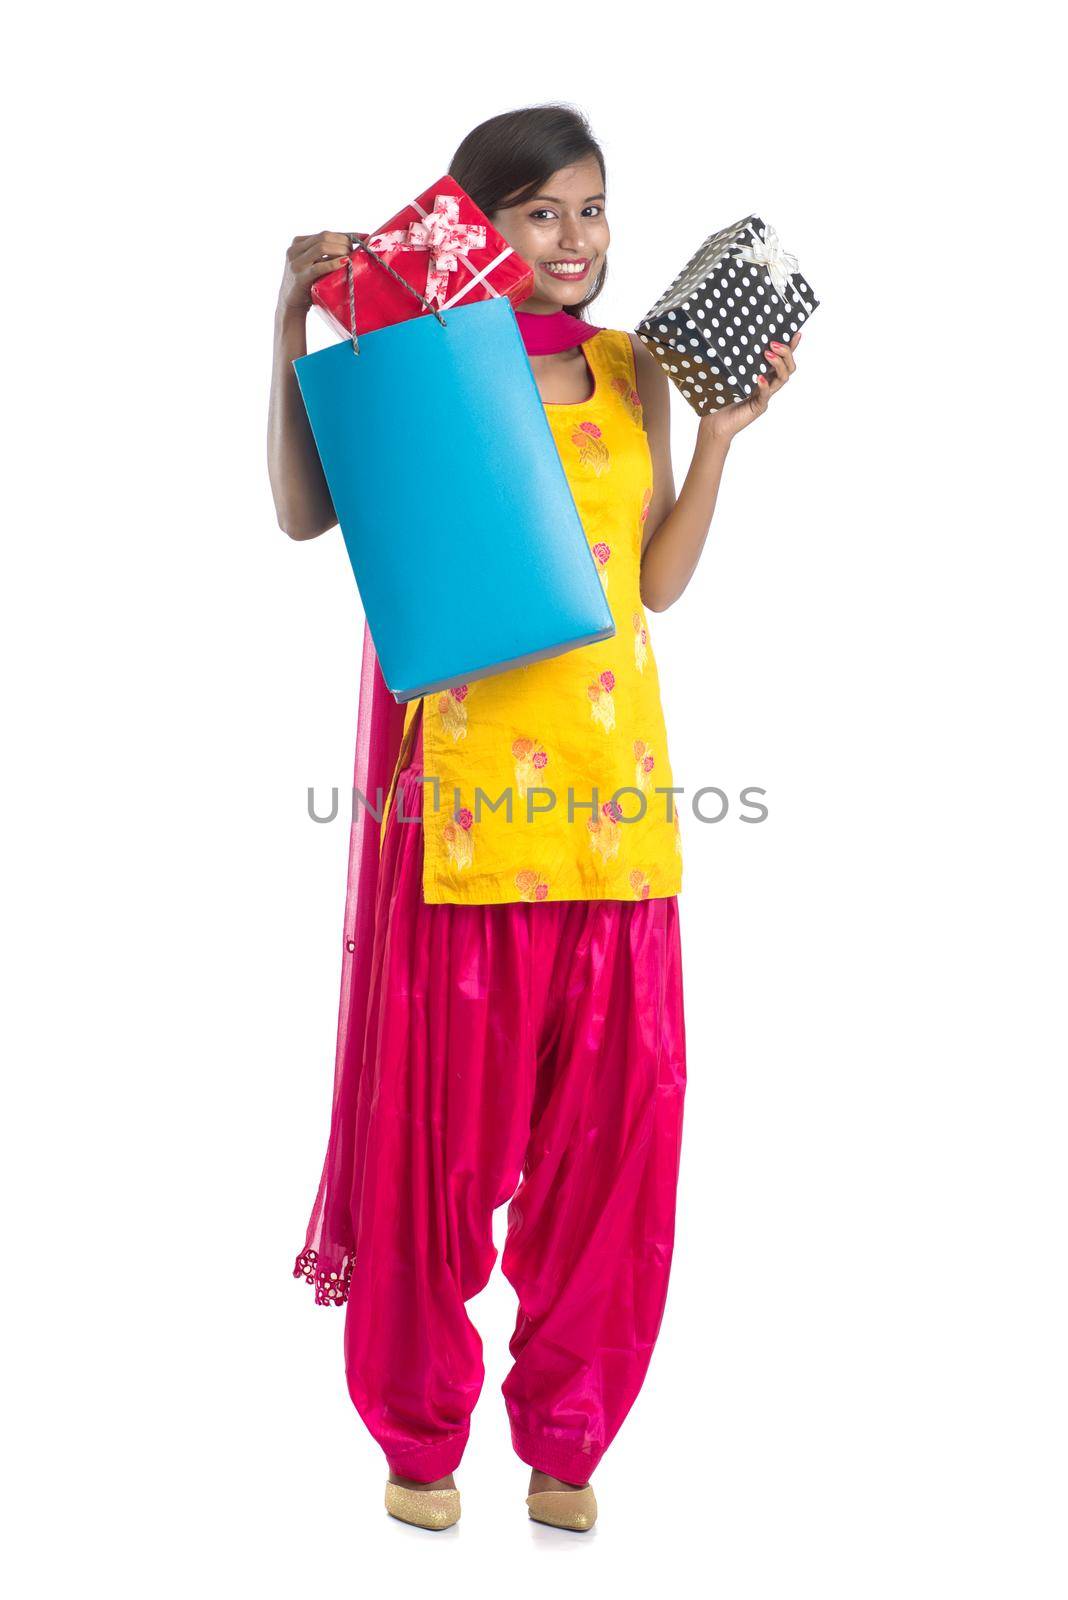 A beautiful woman posing with a shopping bag and gift Boxes on a white background.